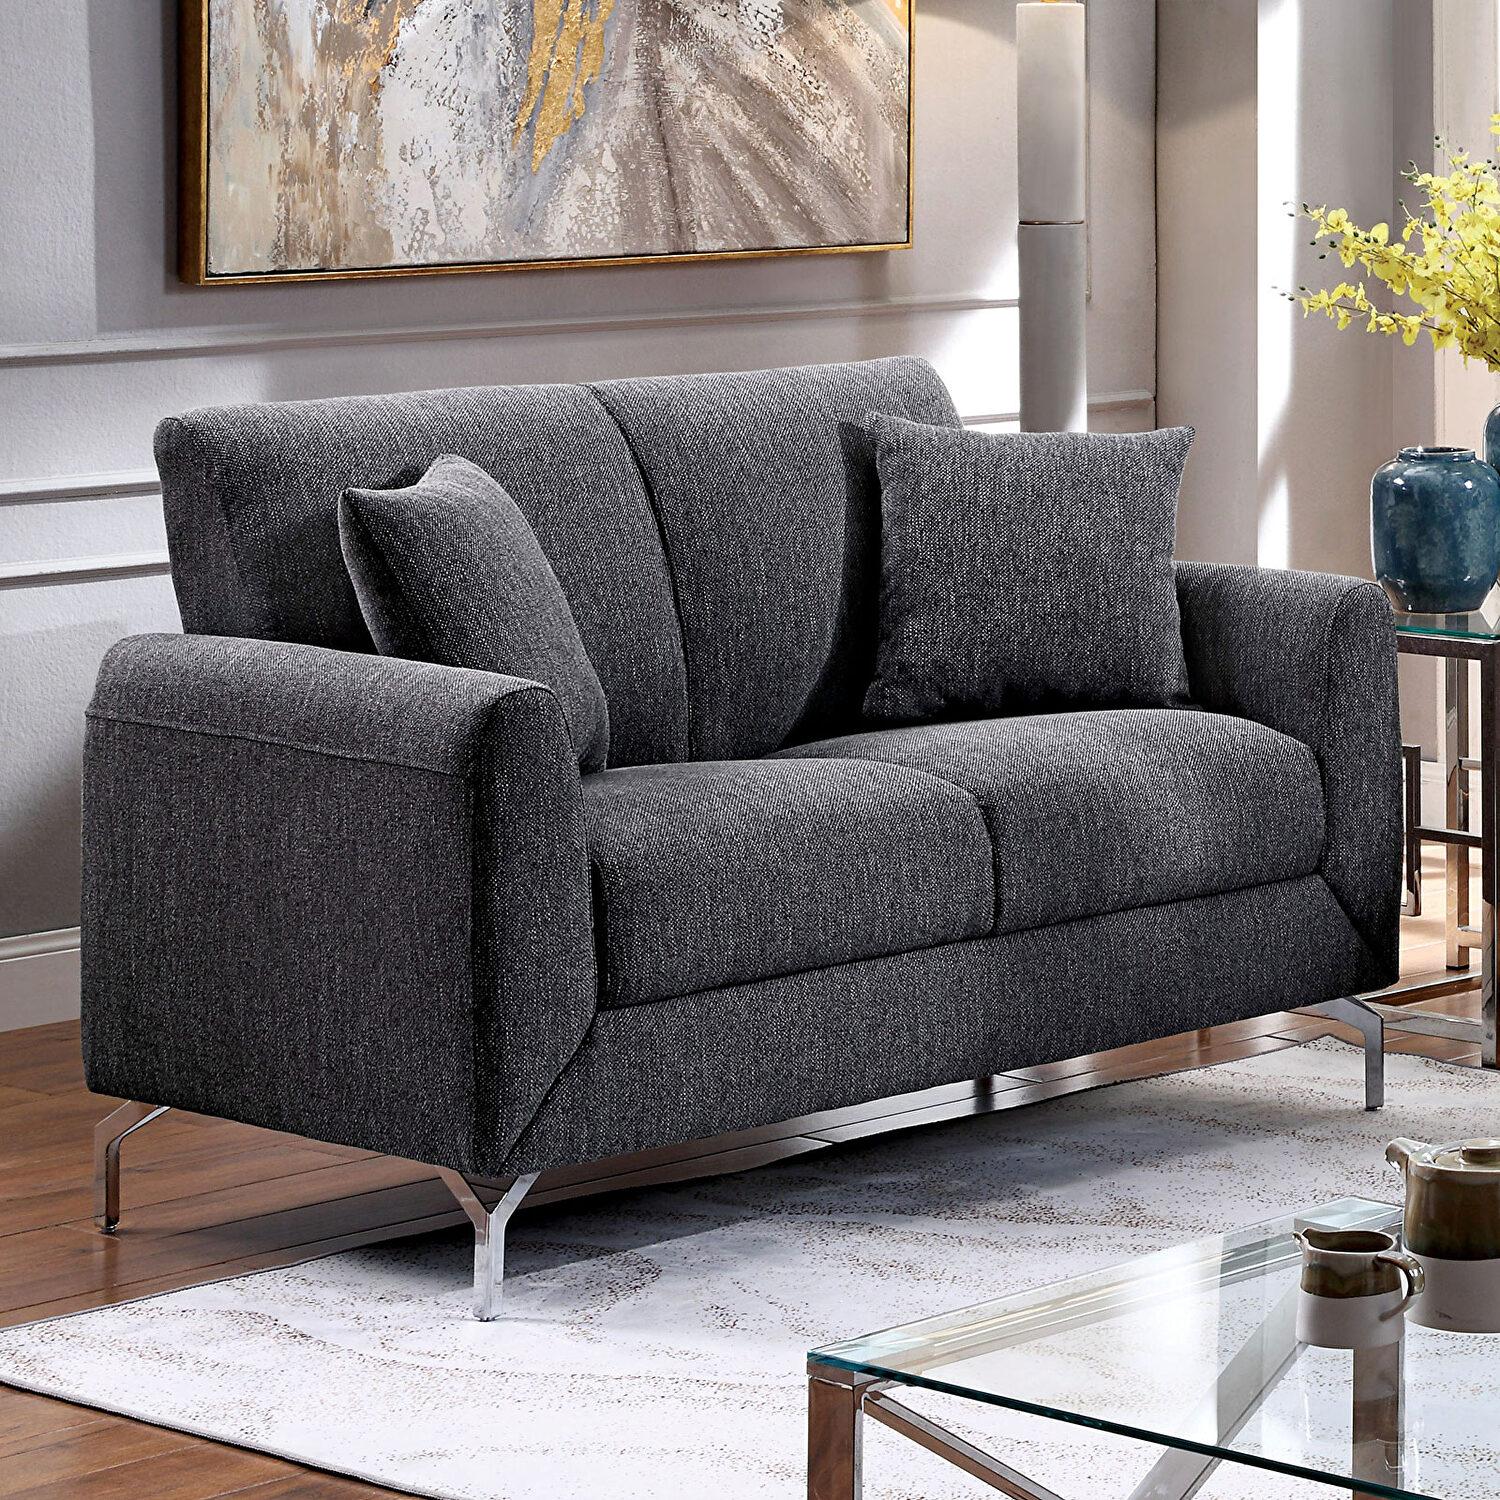 Transitional Loveseat CM6088GY-LV Lauritz CM6088GY-LV in Gray Fabric